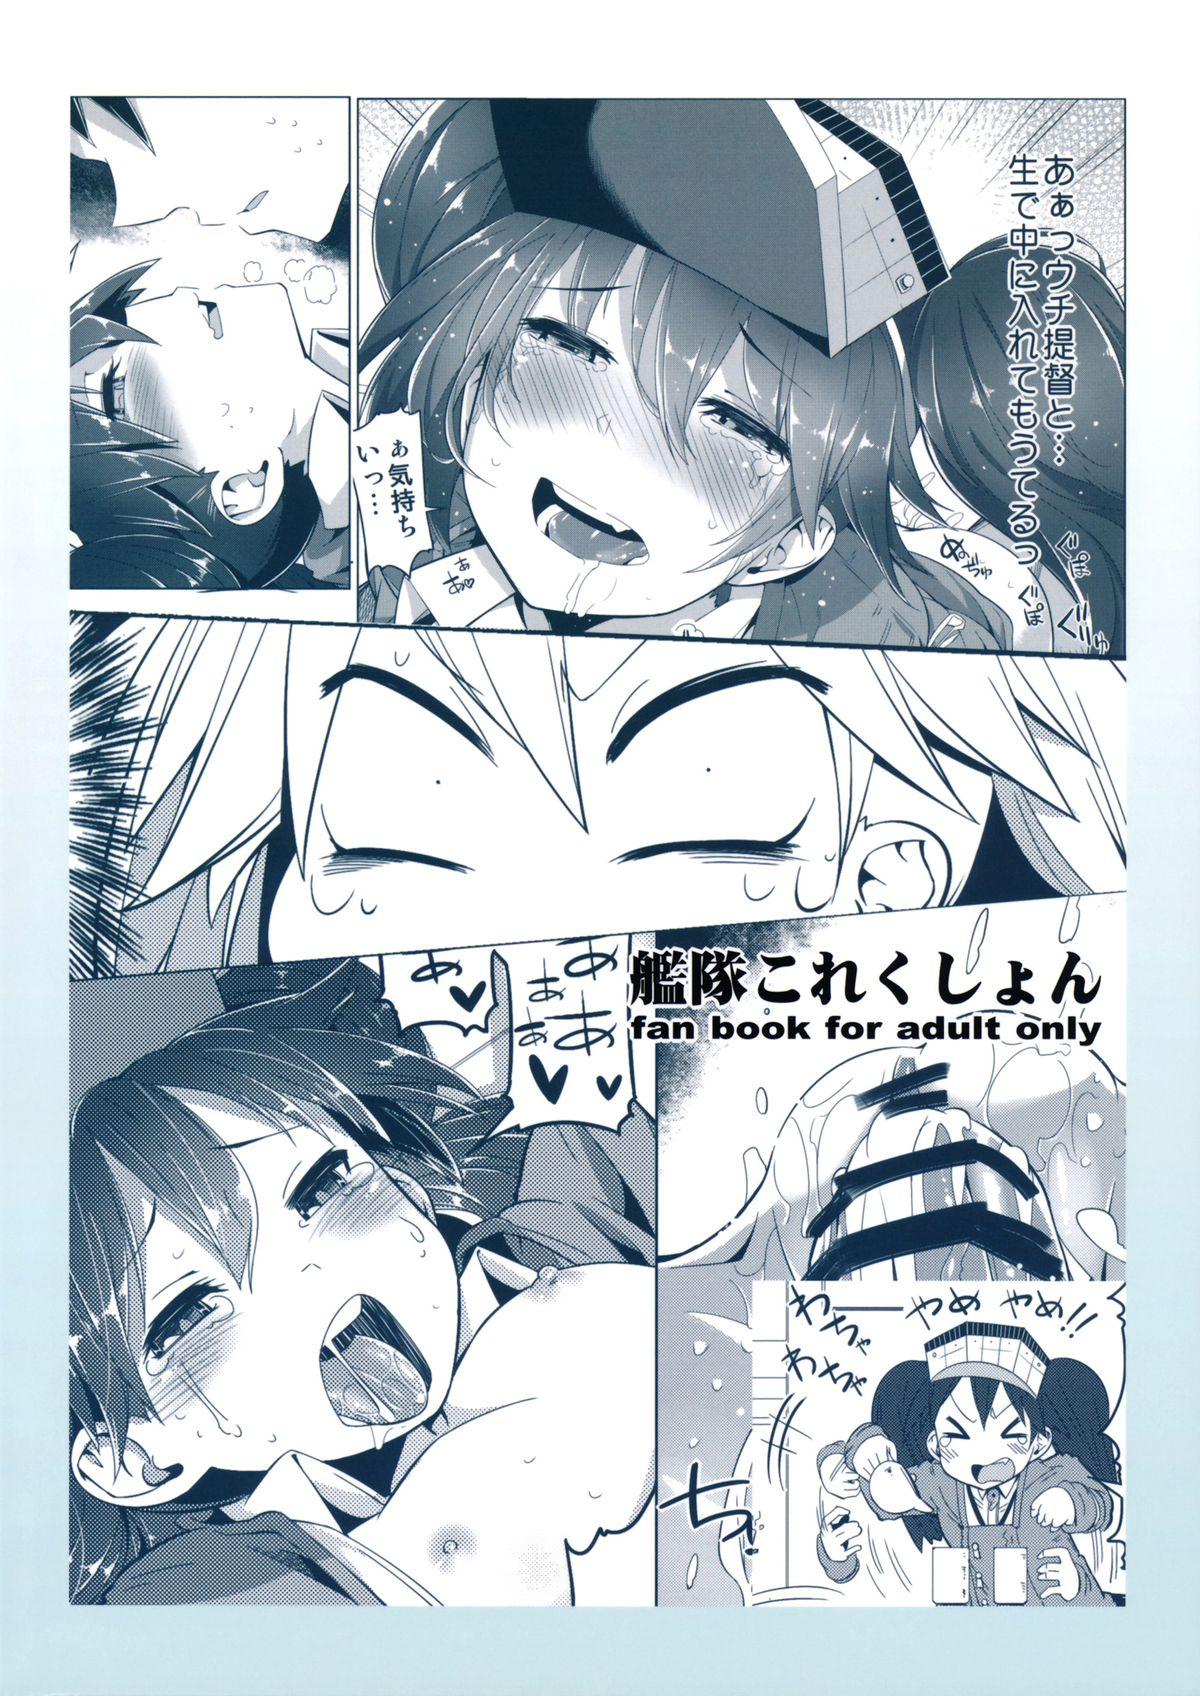 Live Koi suru Otome no Miryoku wa Mune dake janai! | The Allure of a Maiden in Love isn't Only in Her Chest! - Kantai collection Facefuck - Page 22